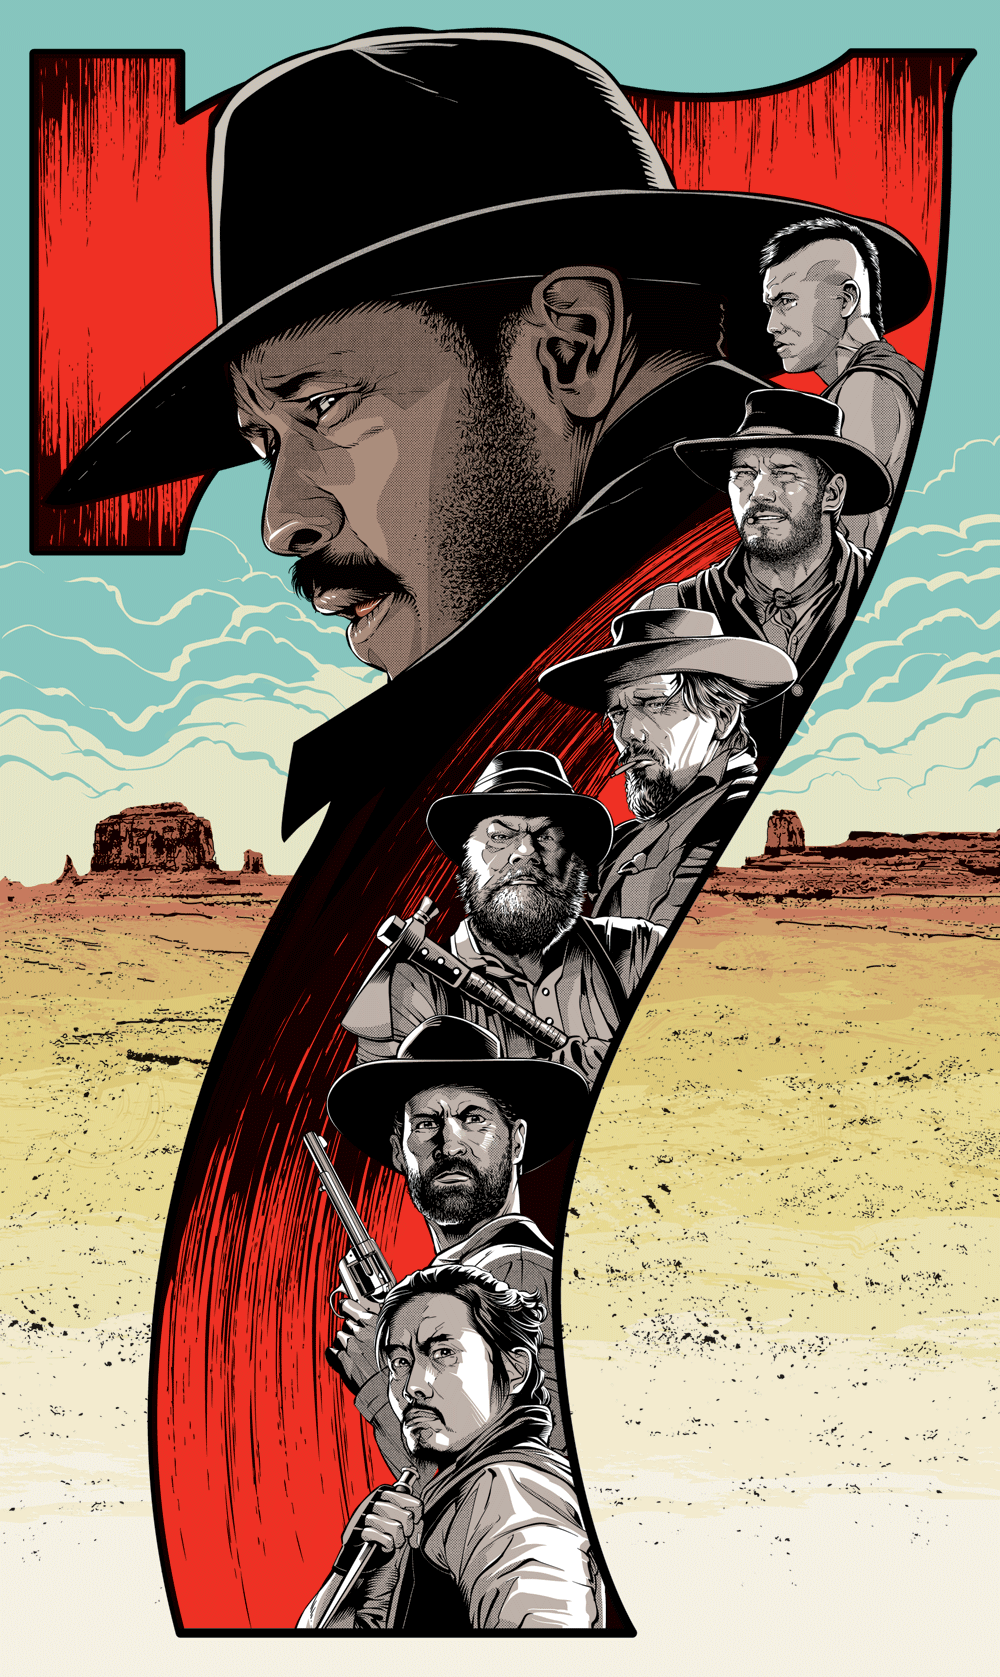 The Magnificent Seven (2016) HD Wallpaper From Gallsource.com